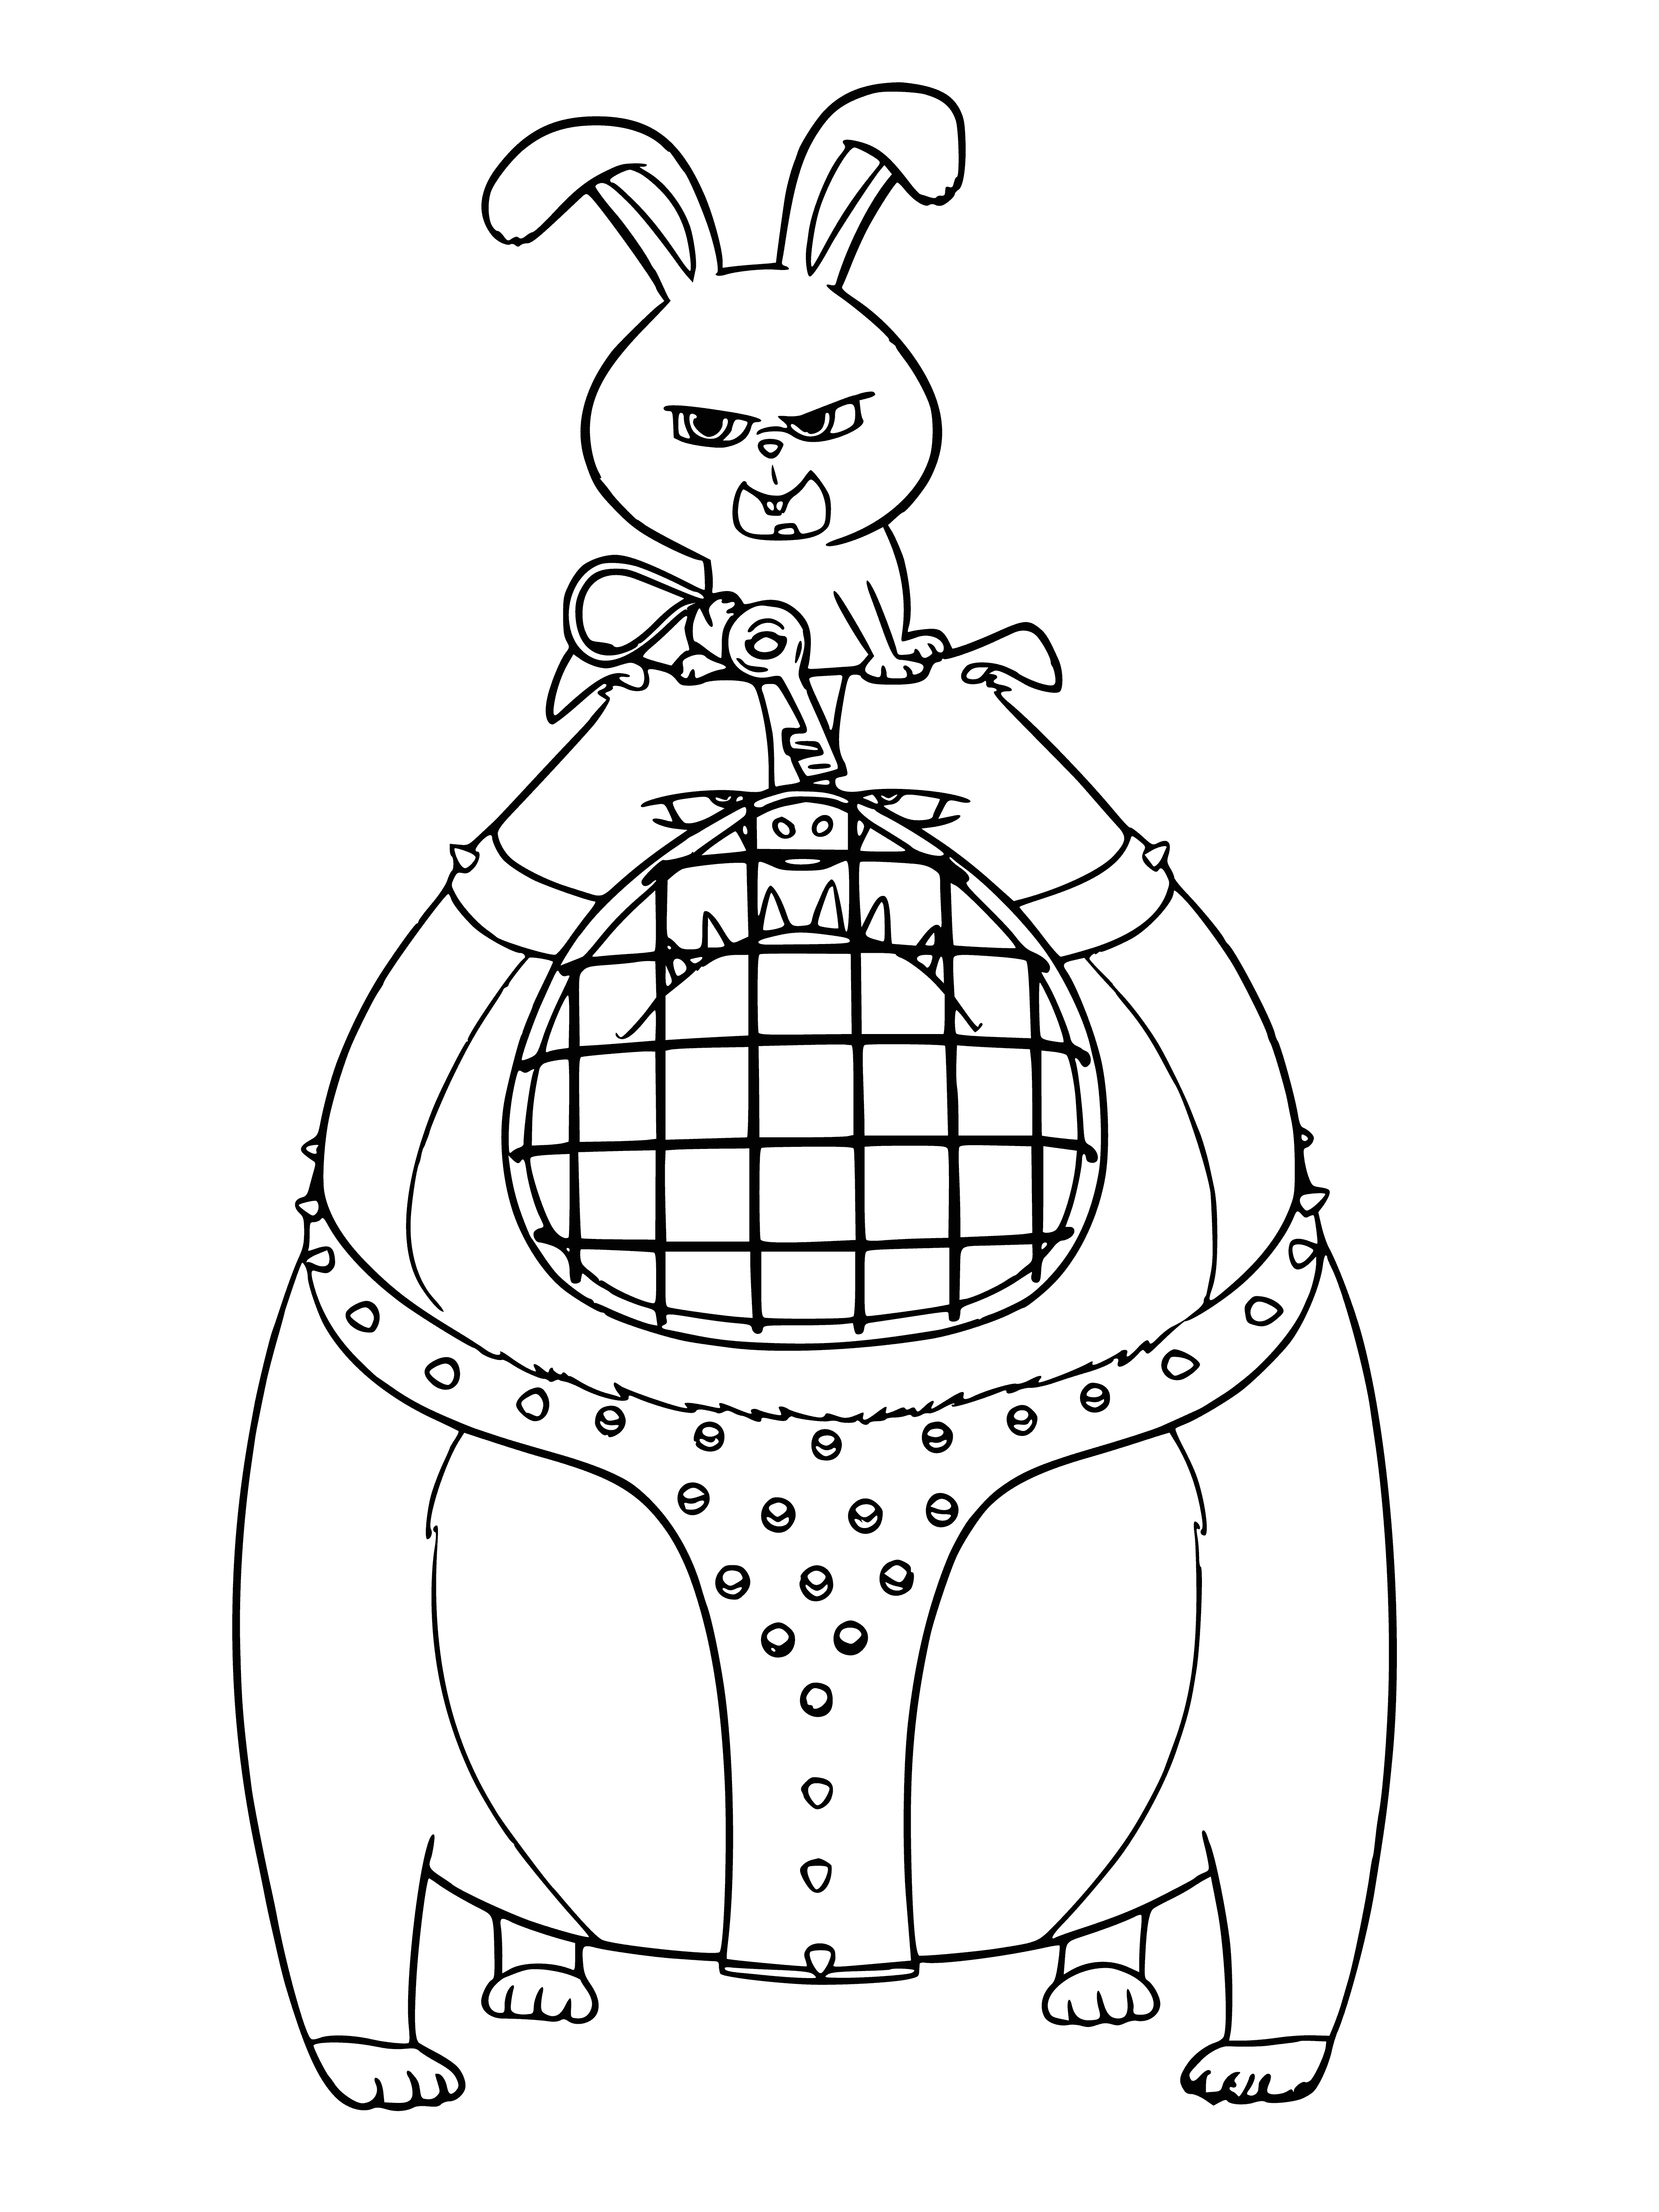 Beastly underground coloring page